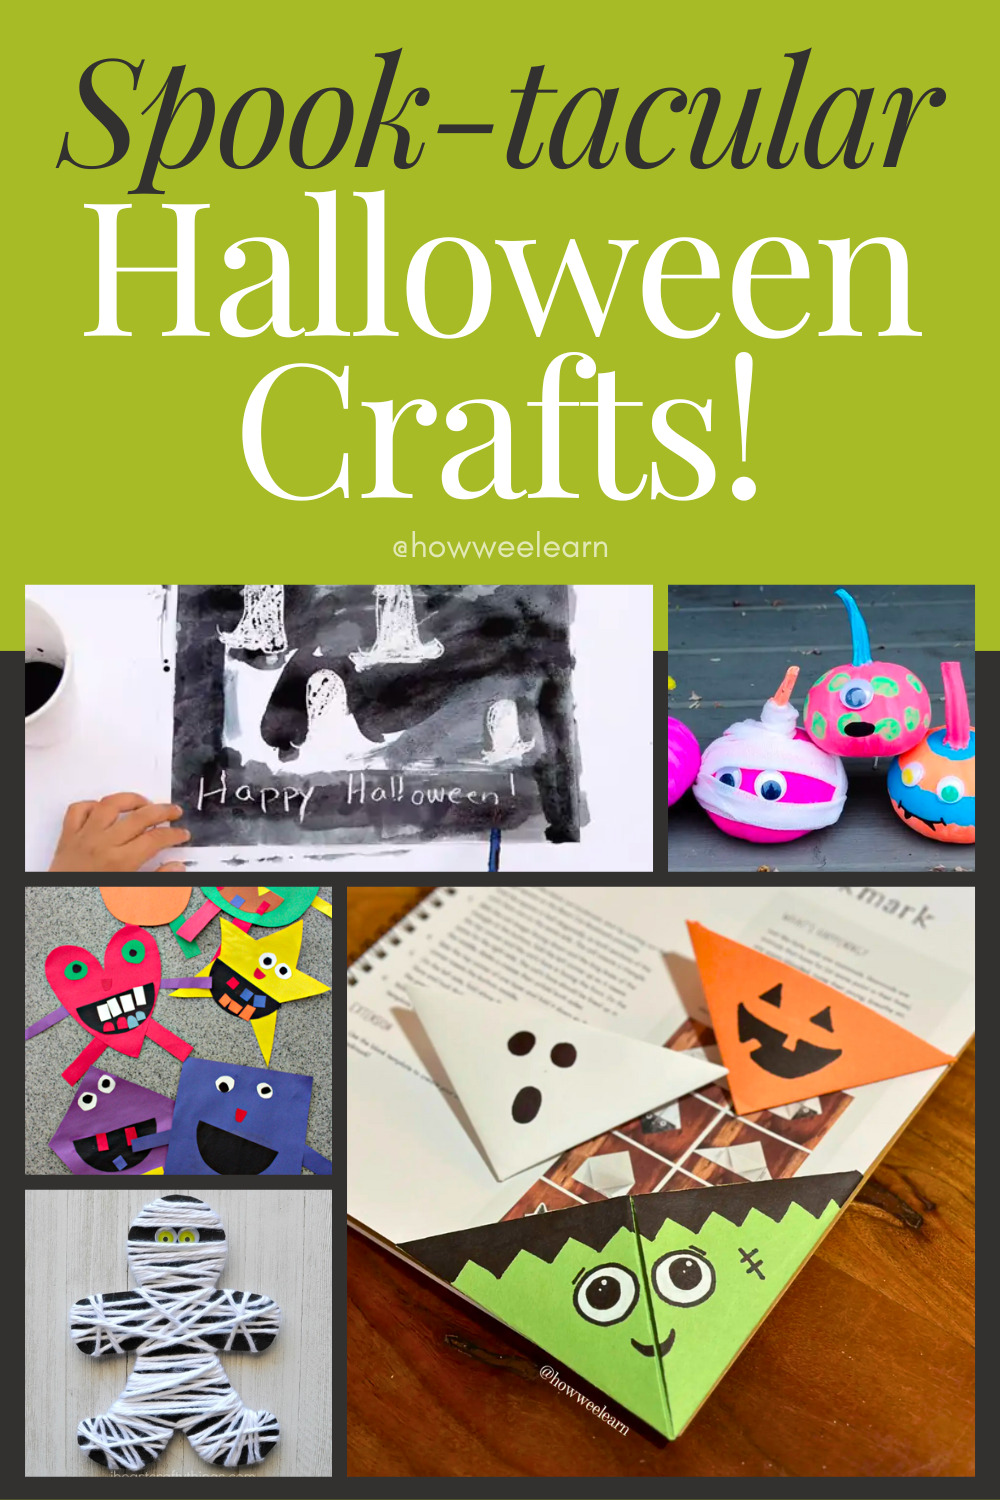 SPOOK-tacularly Simple Halloween Crafts for Kids - How Wee Learn